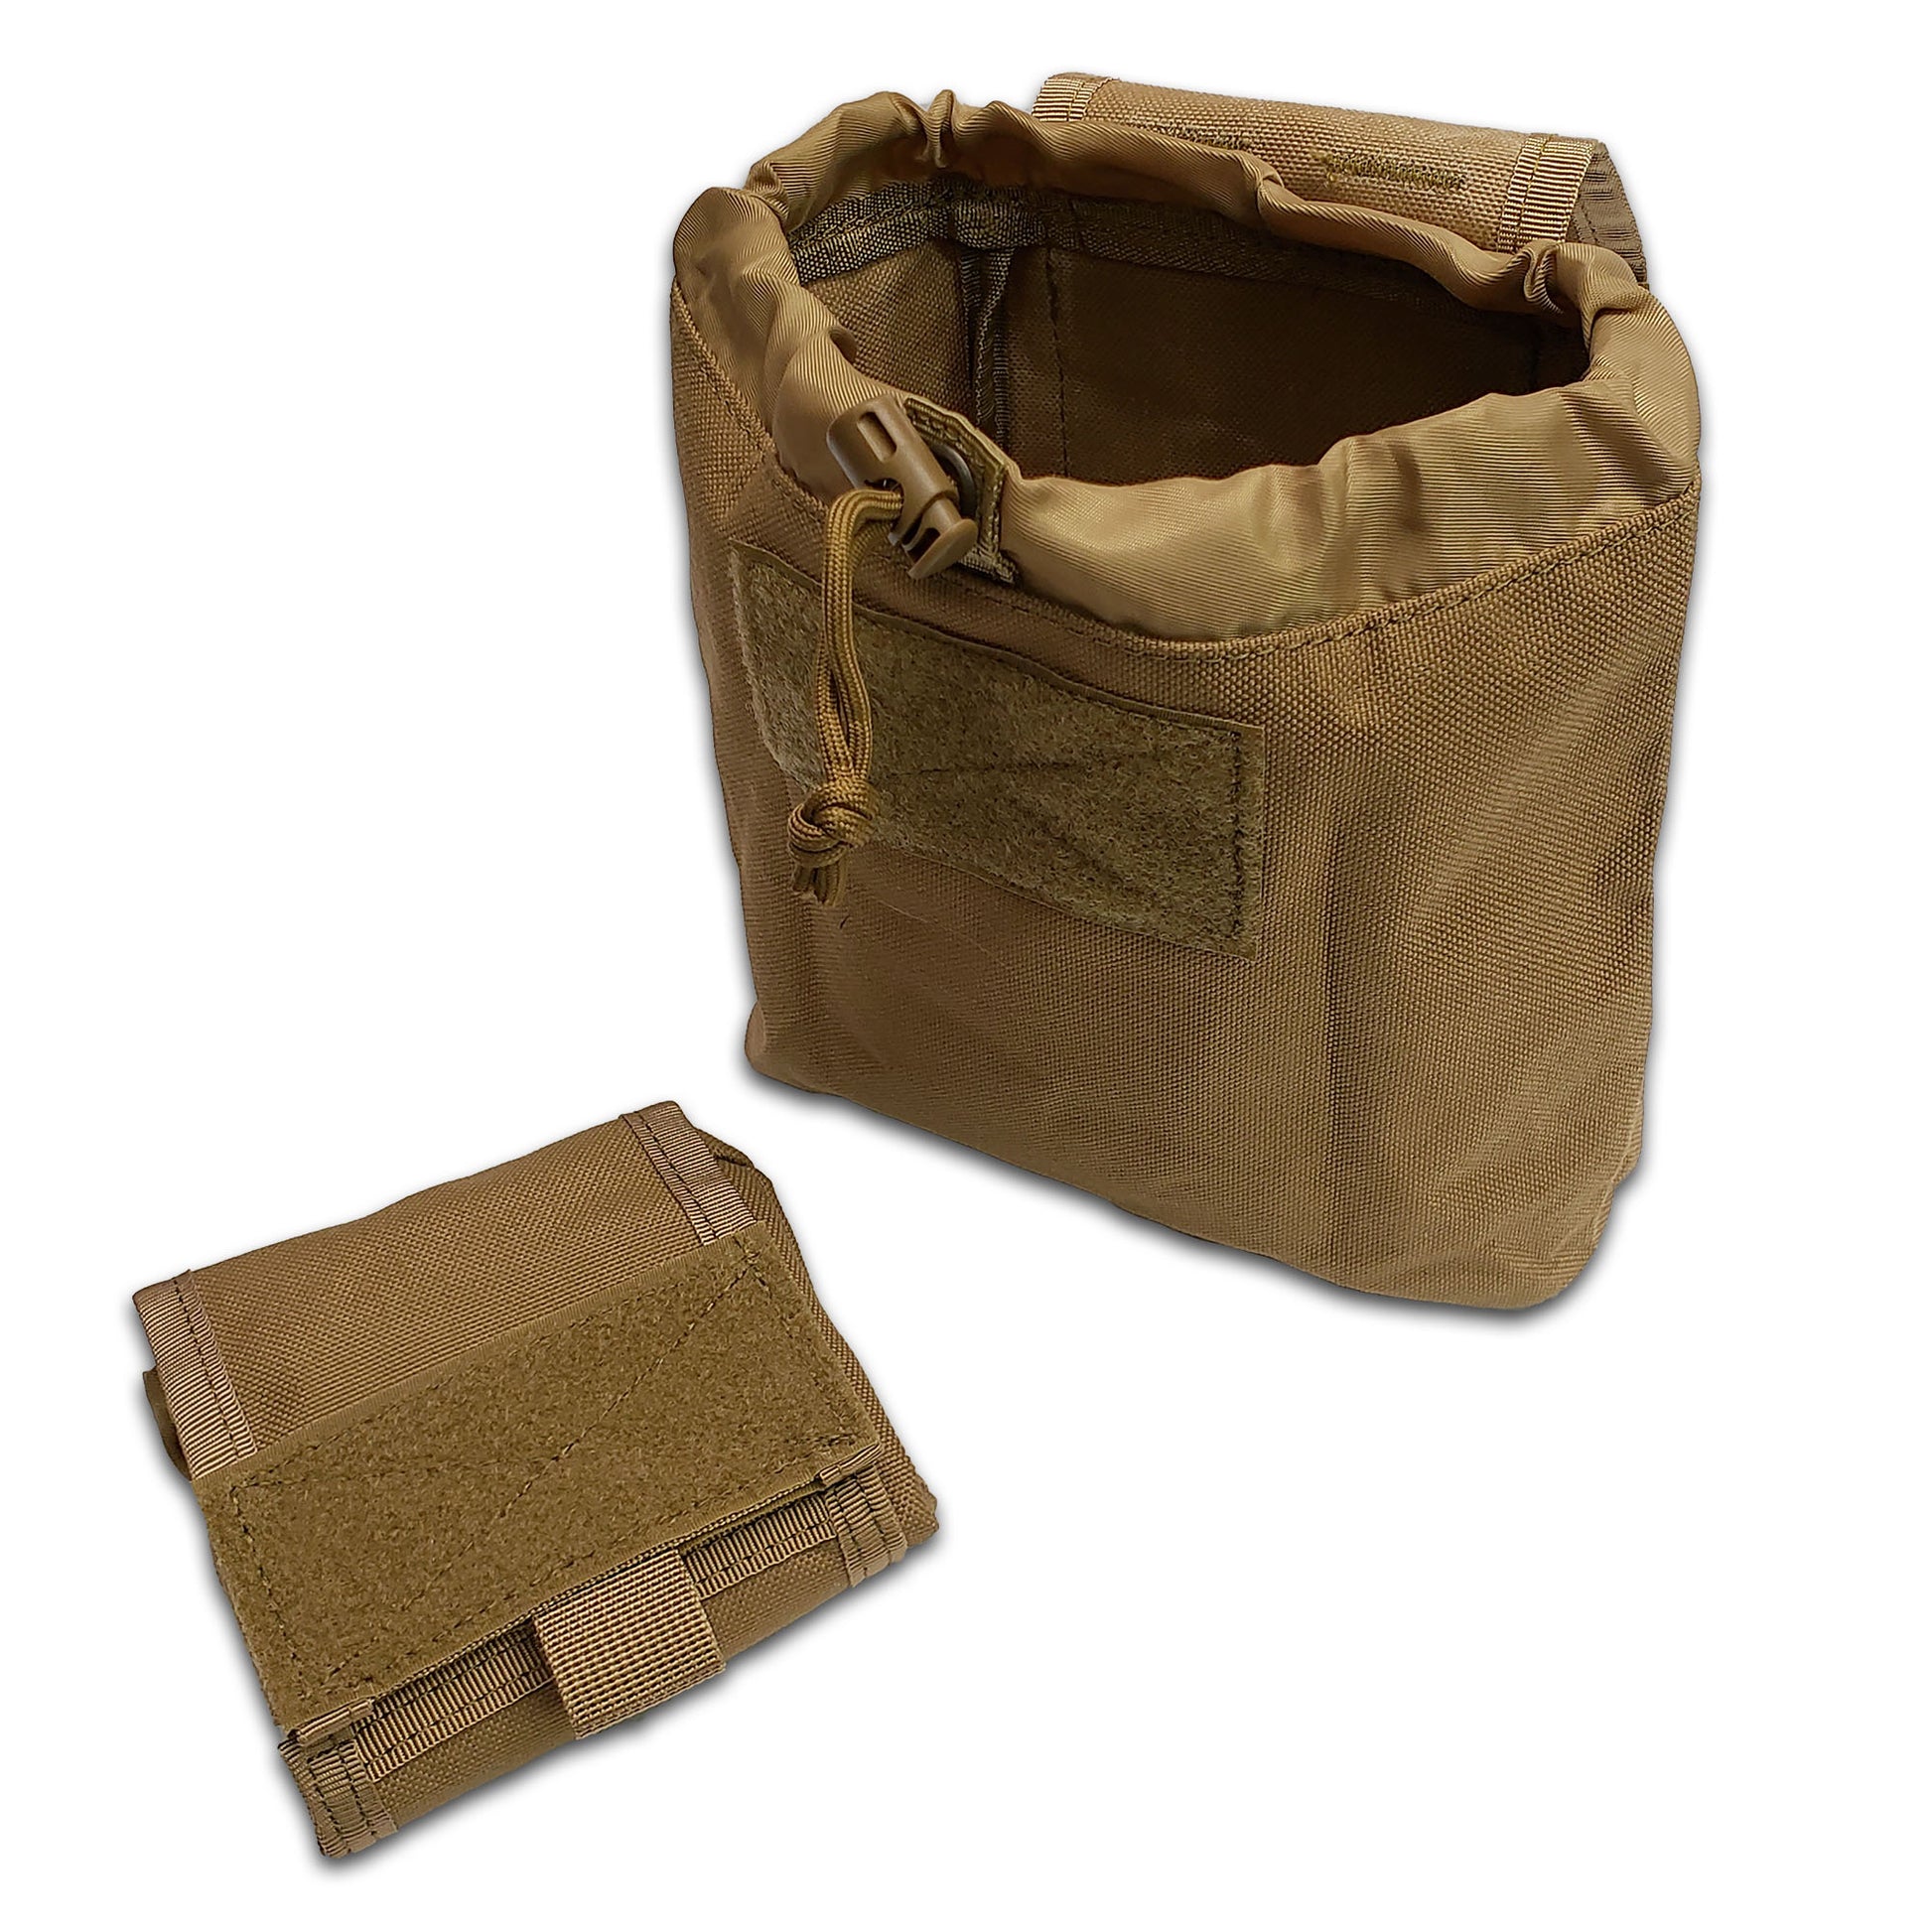 Nylon Possibles Pouch - Pack and Store Small Items - w/Molle Attachment  Straps